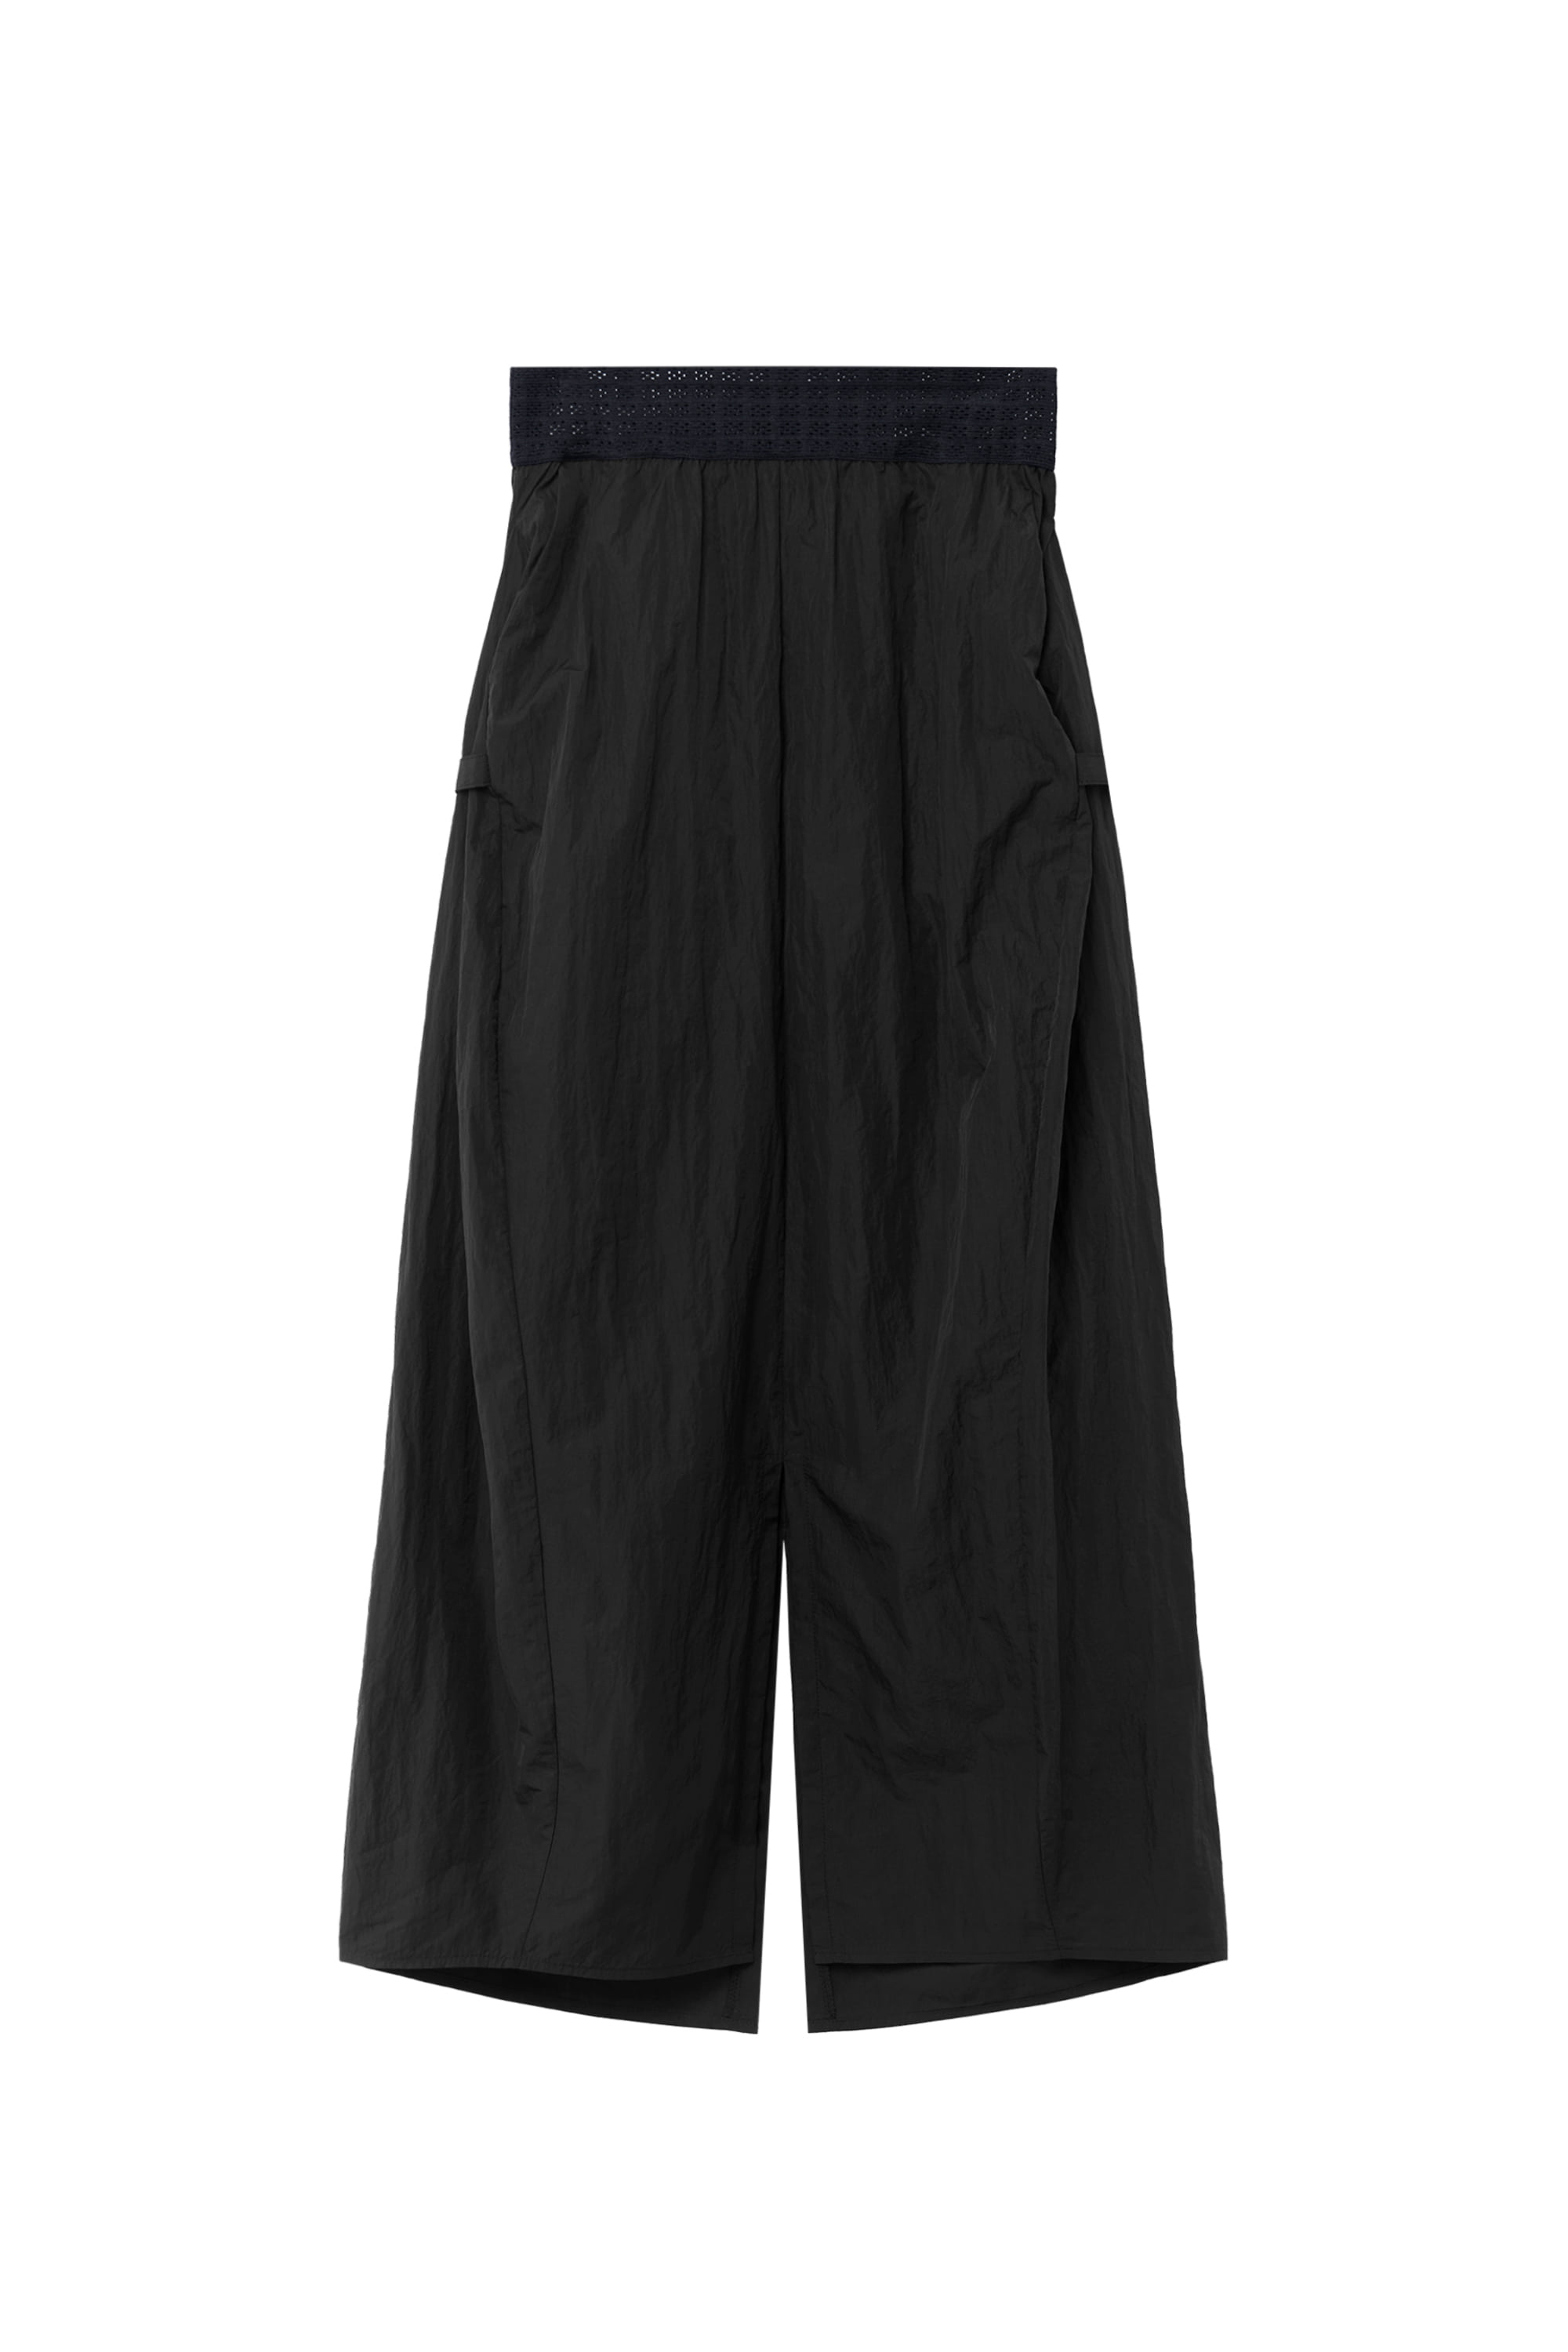 TULLY COCOON SKIRT BLACK